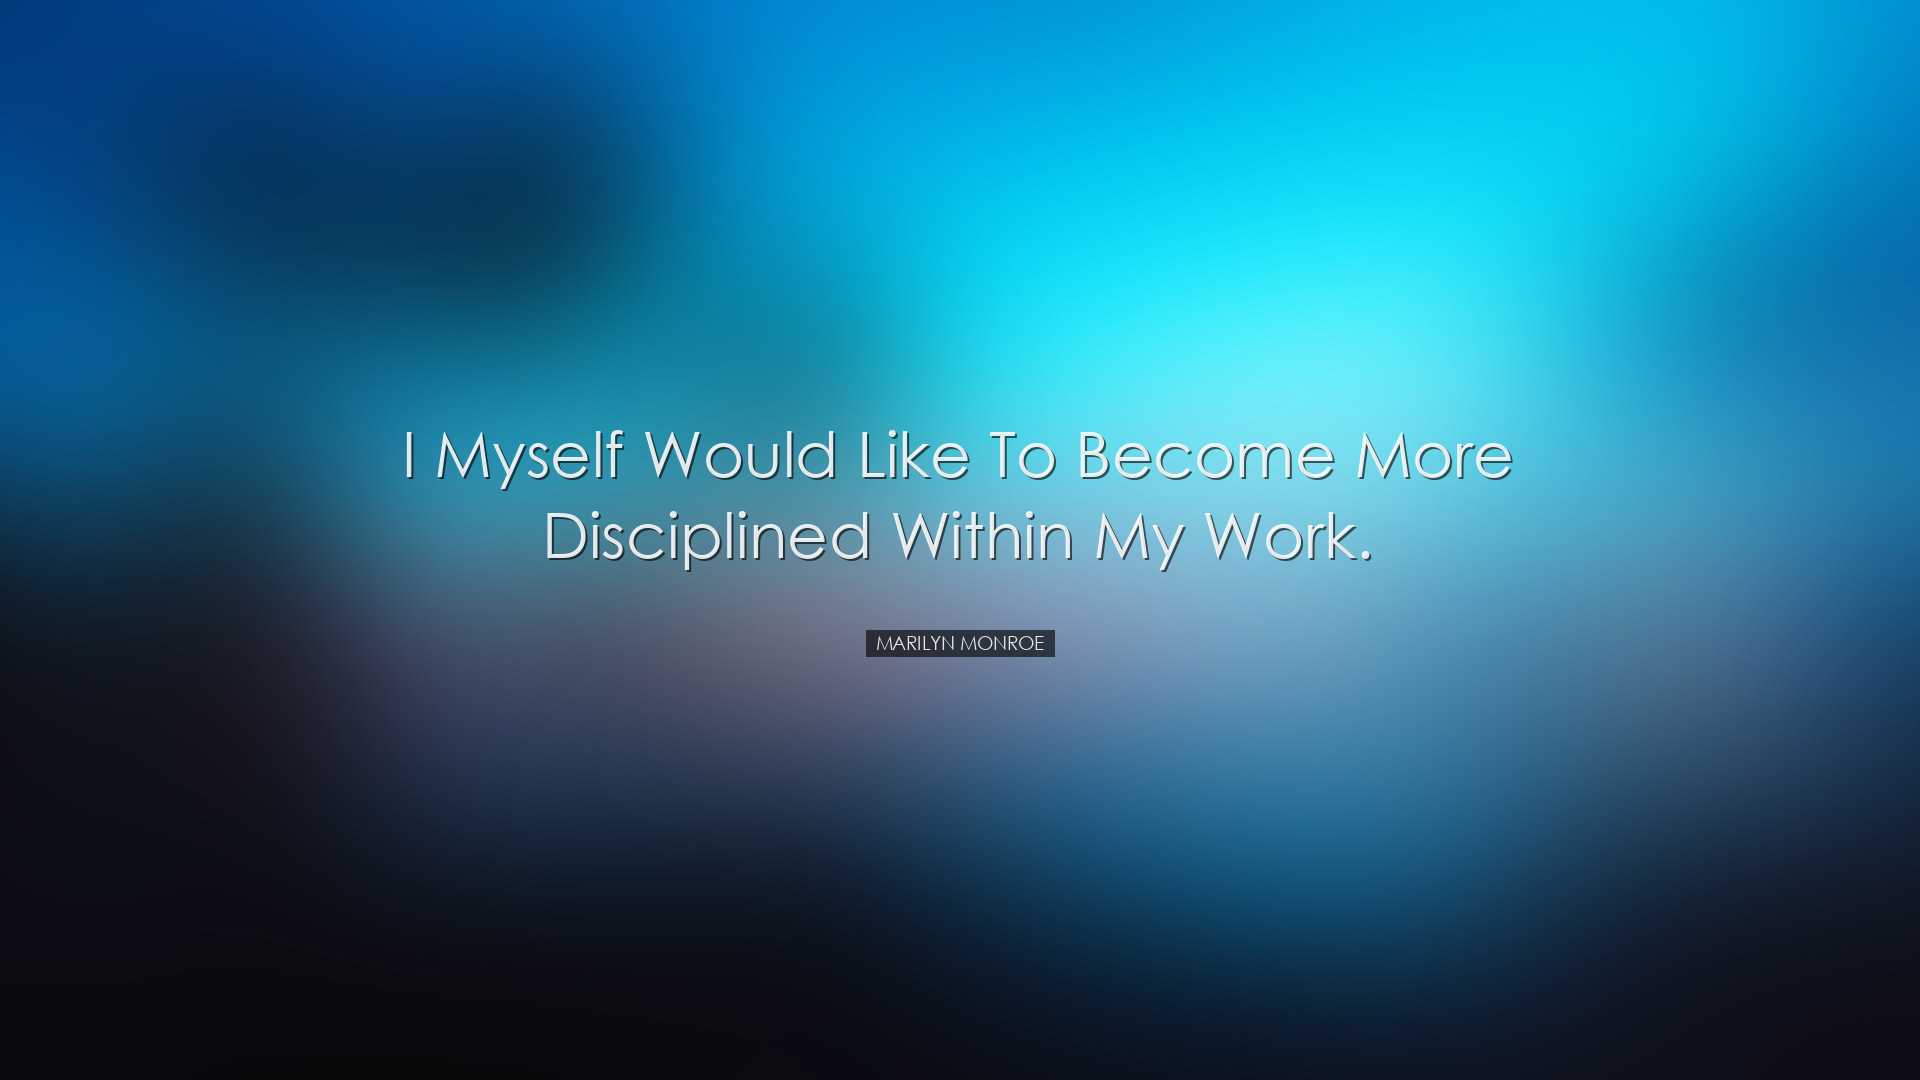 I myself would like to become more disciplined within my work. - M